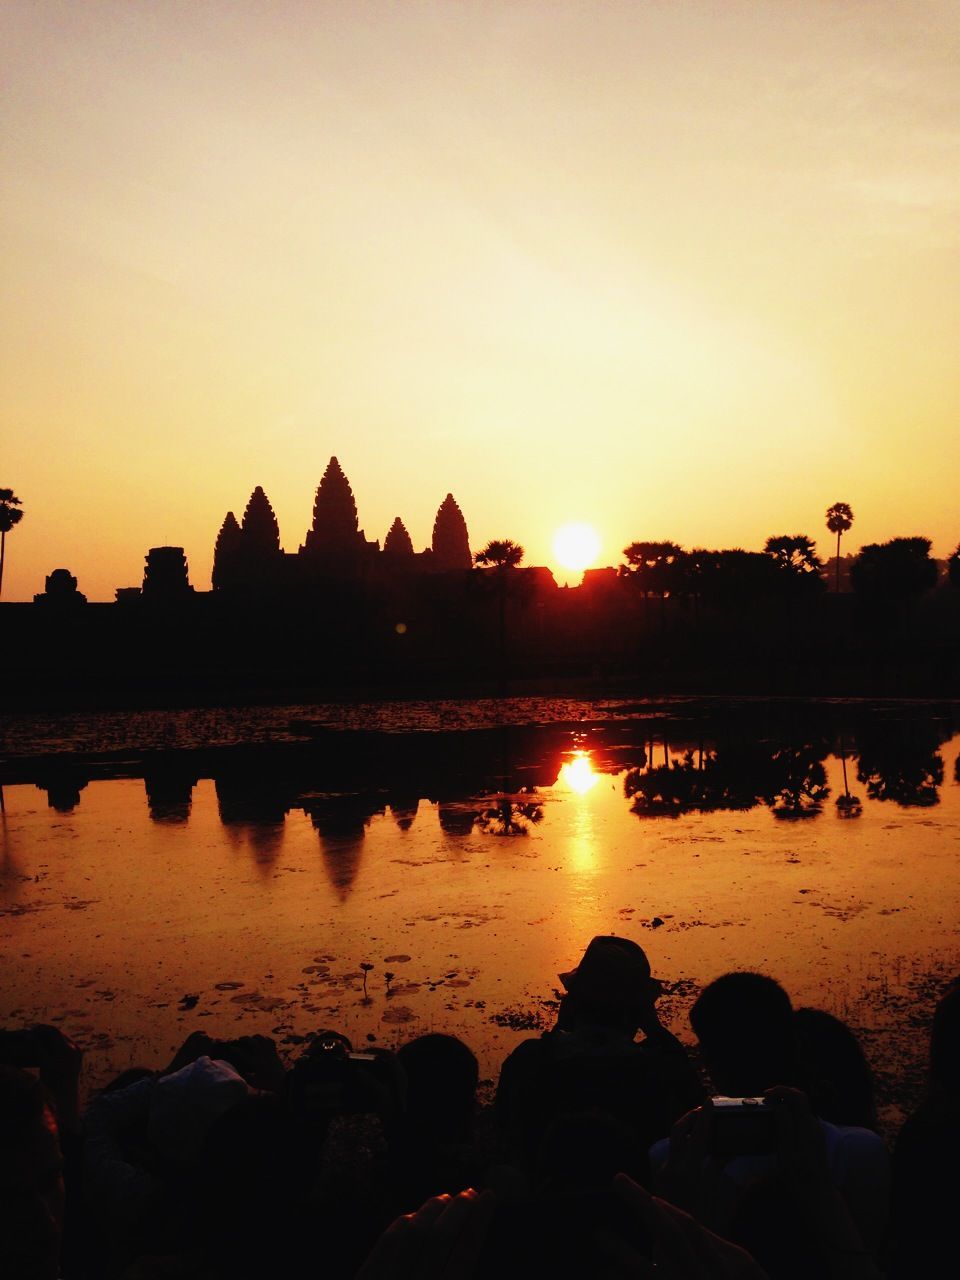 Silhouette angkor wat temples reflecting in water during sunrise